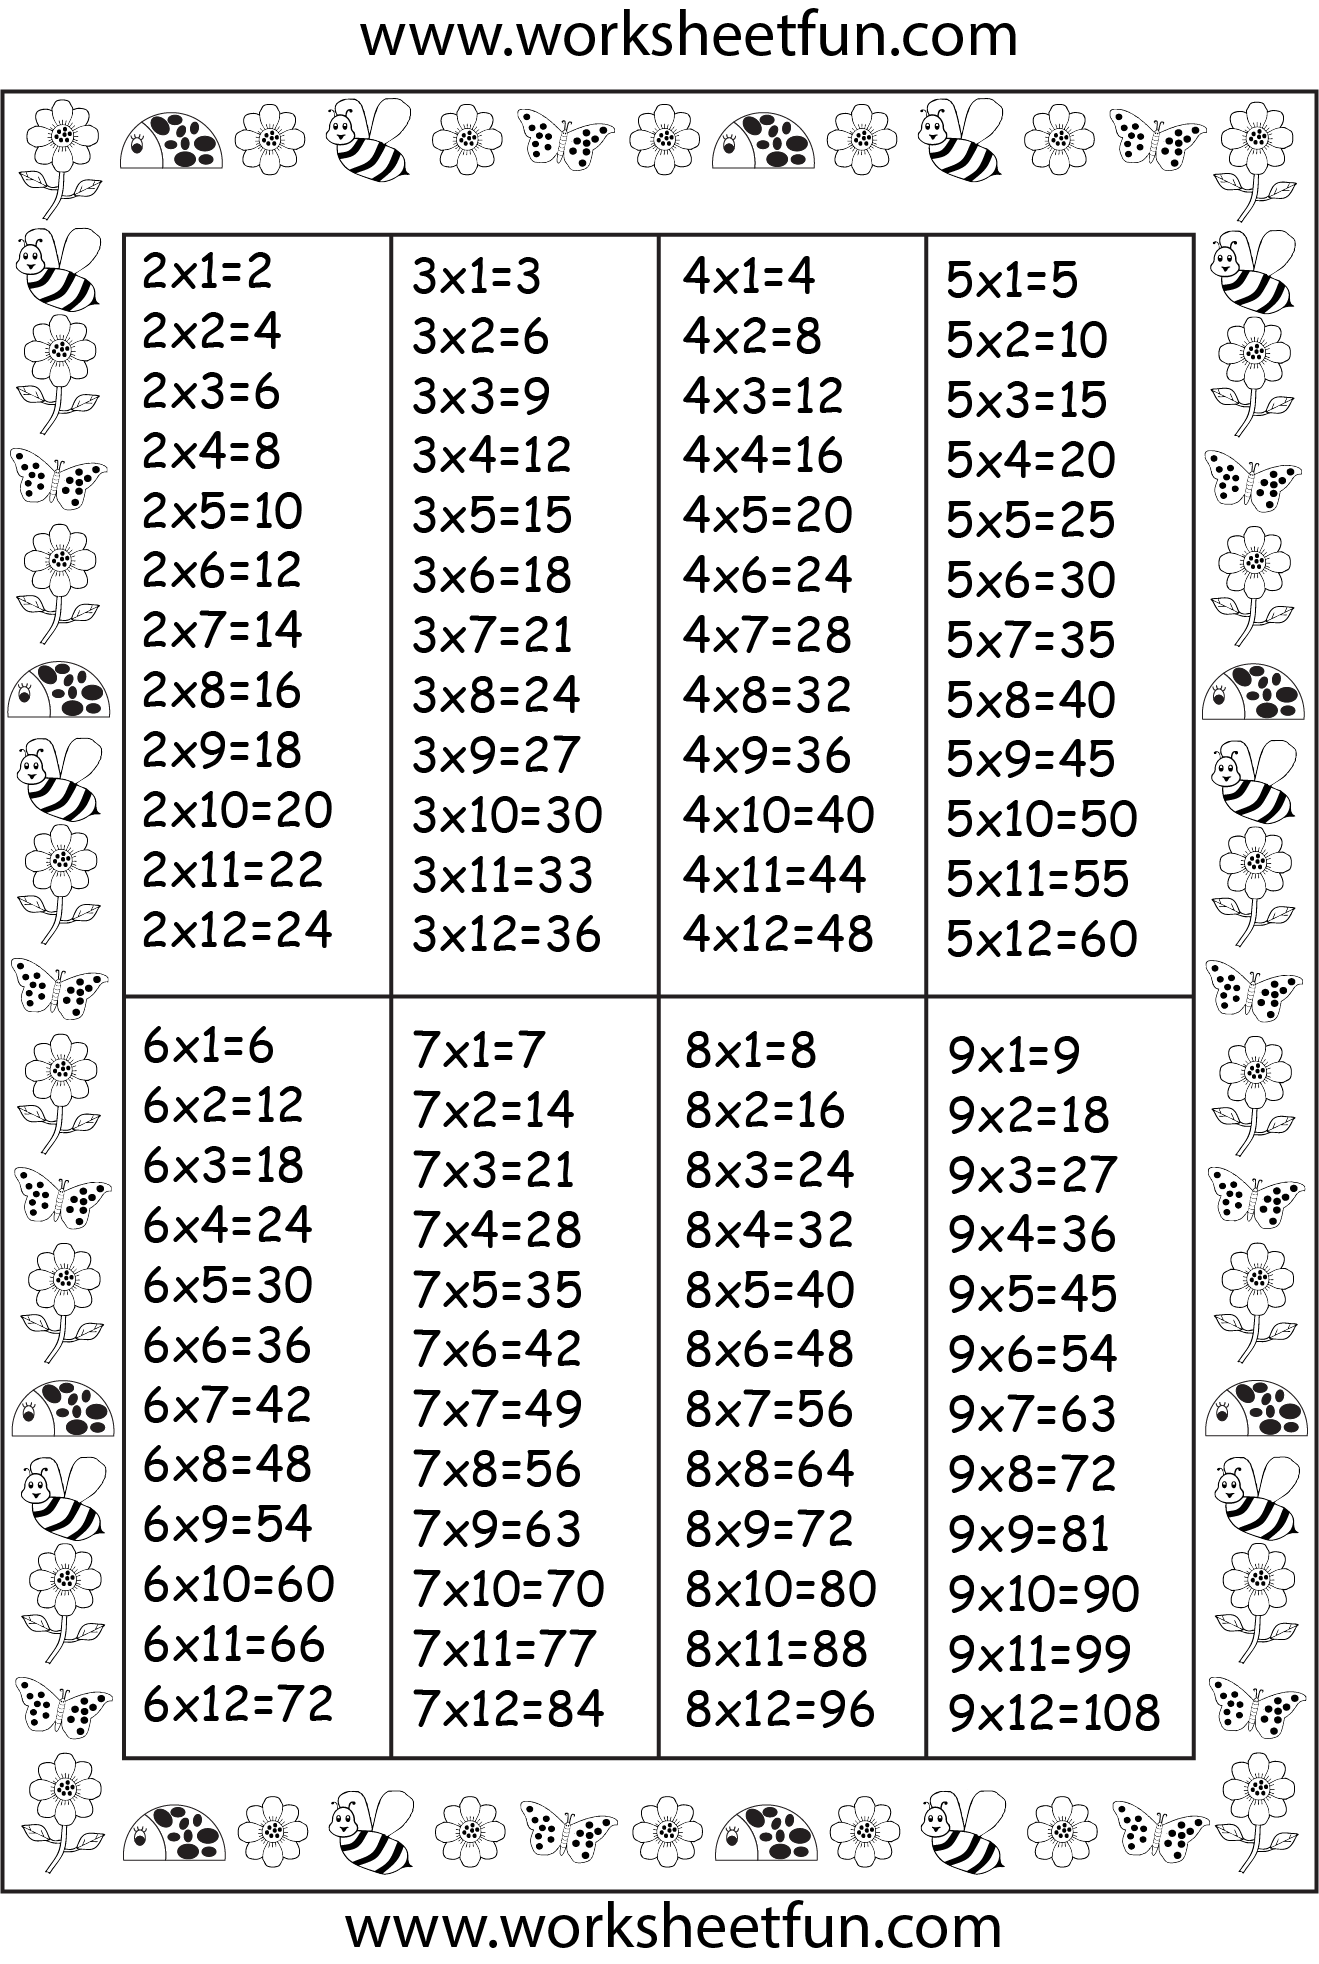 times-table-chart-2-3-4-5-6-7-8-9-free-printable-worksheets